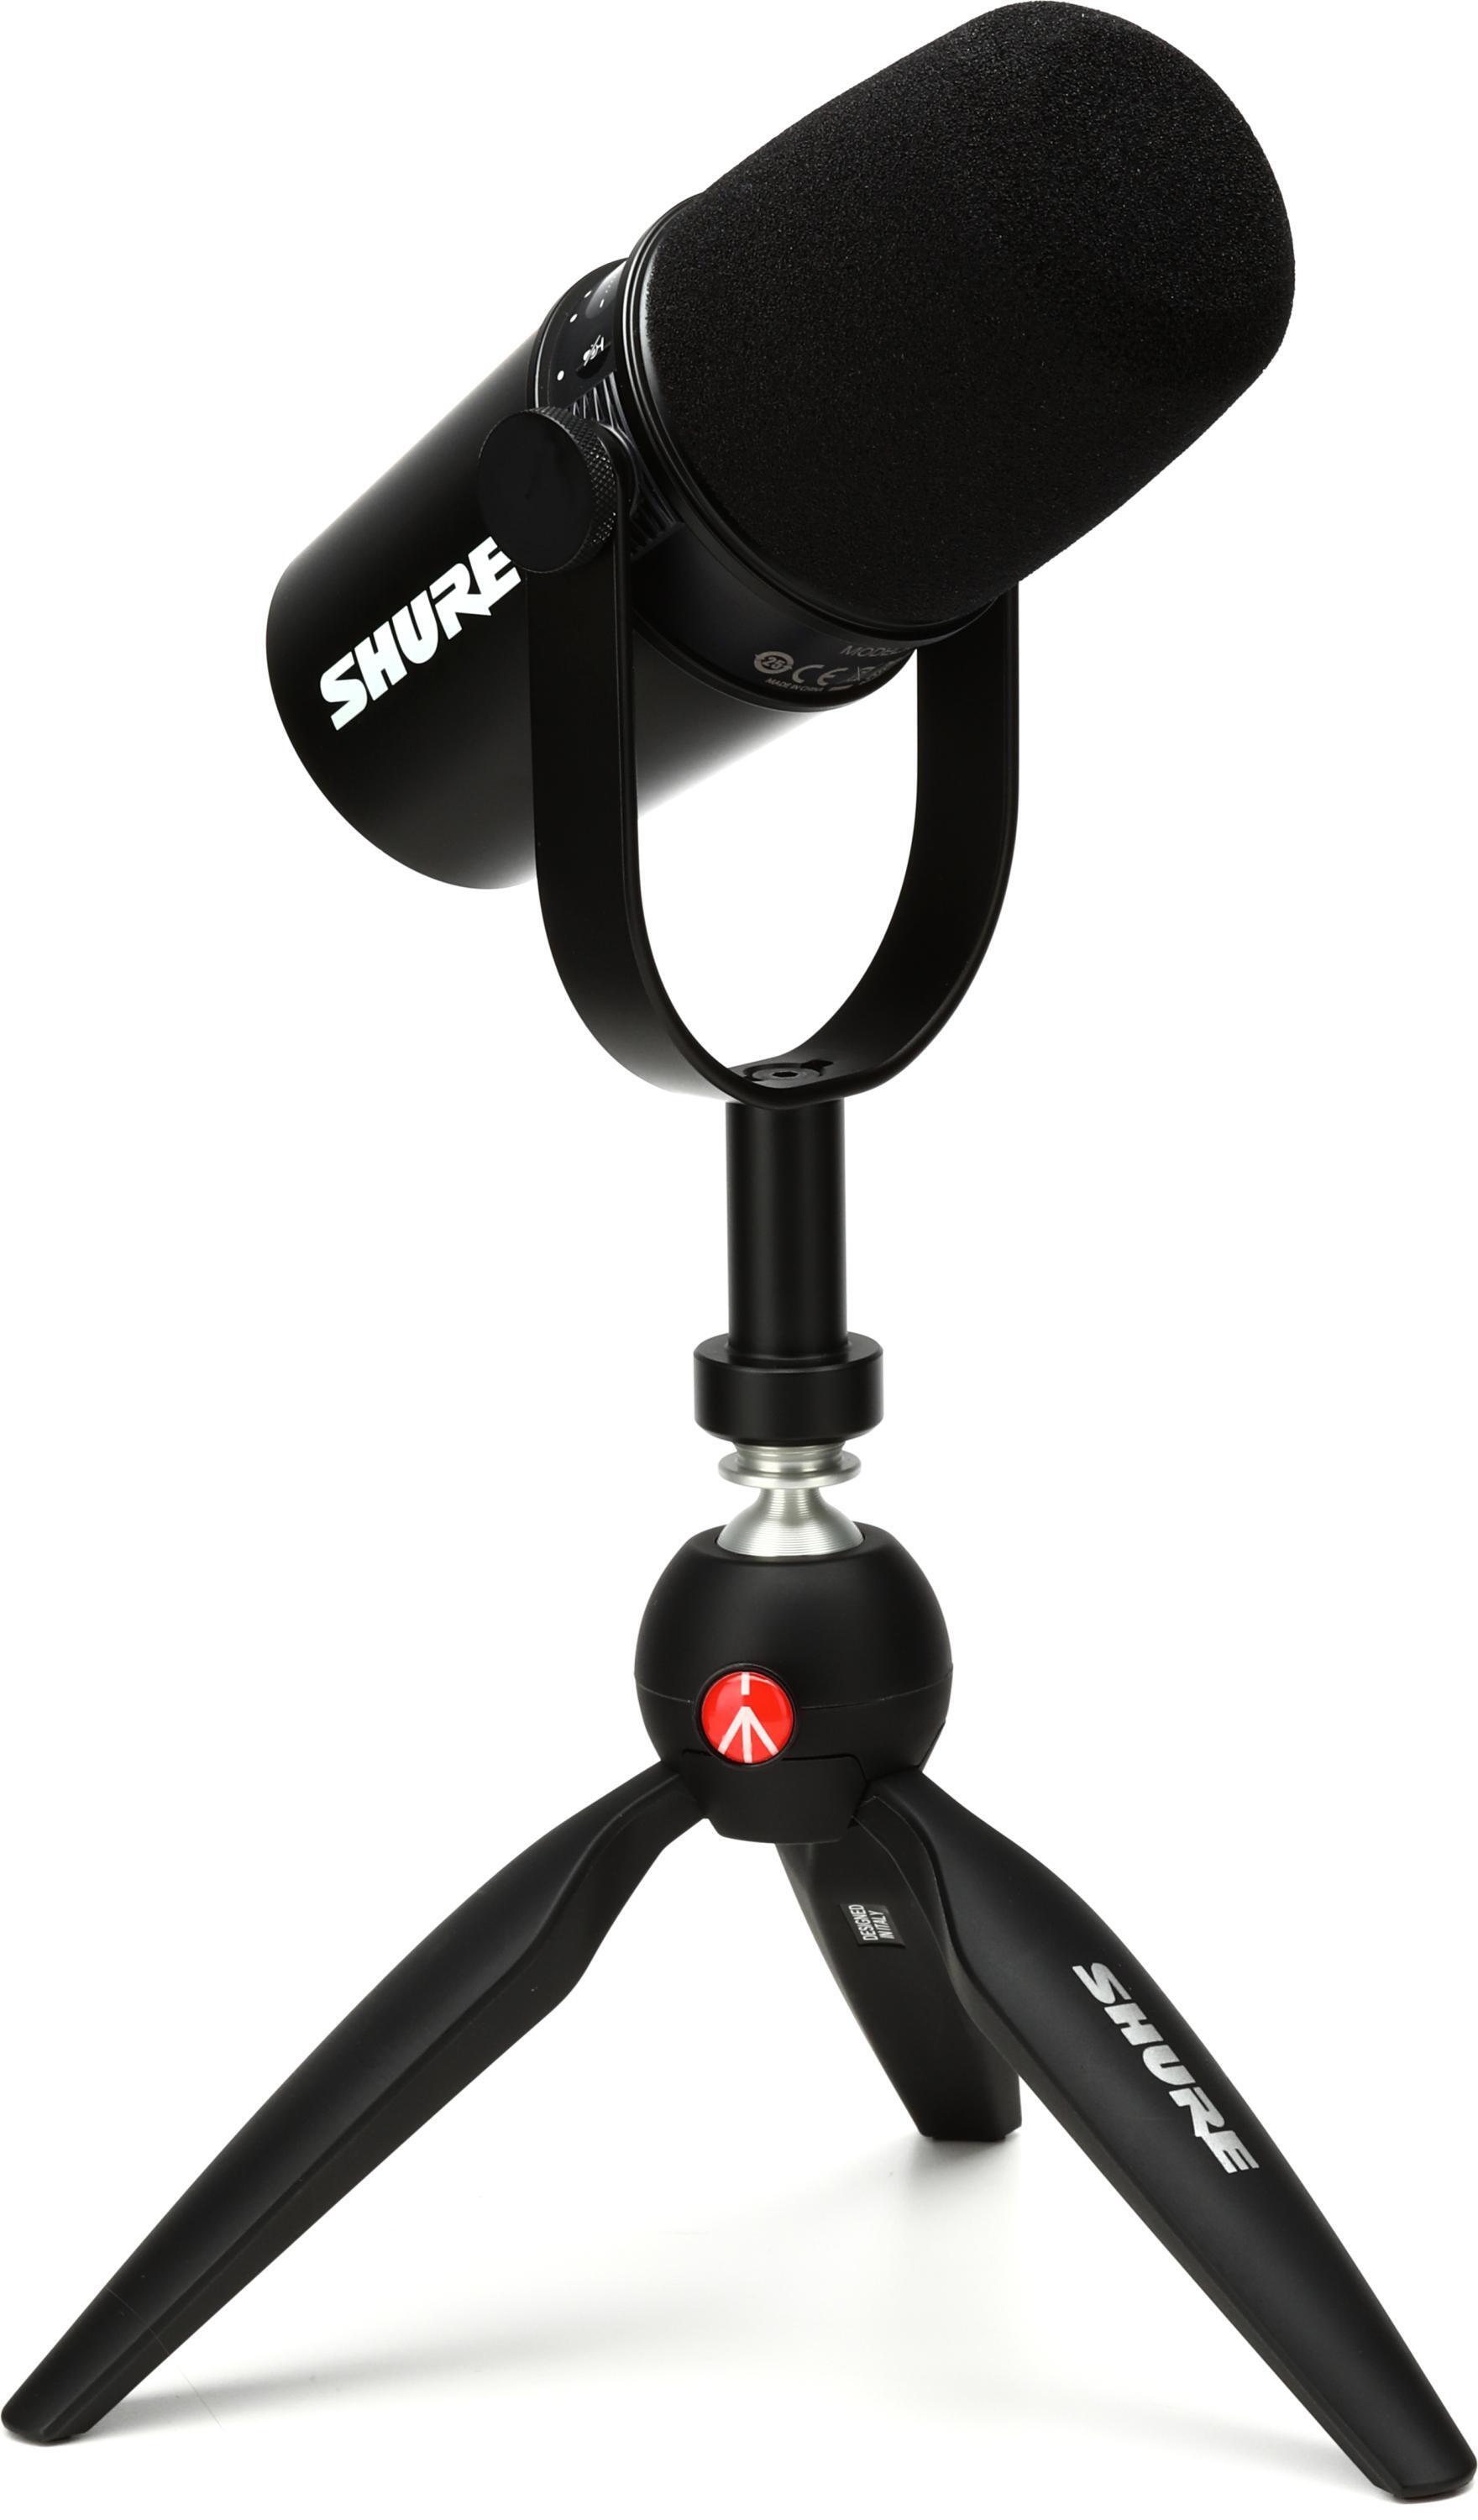 Shure MV7 USB Podcast Microphone and Stand | Sweetwater